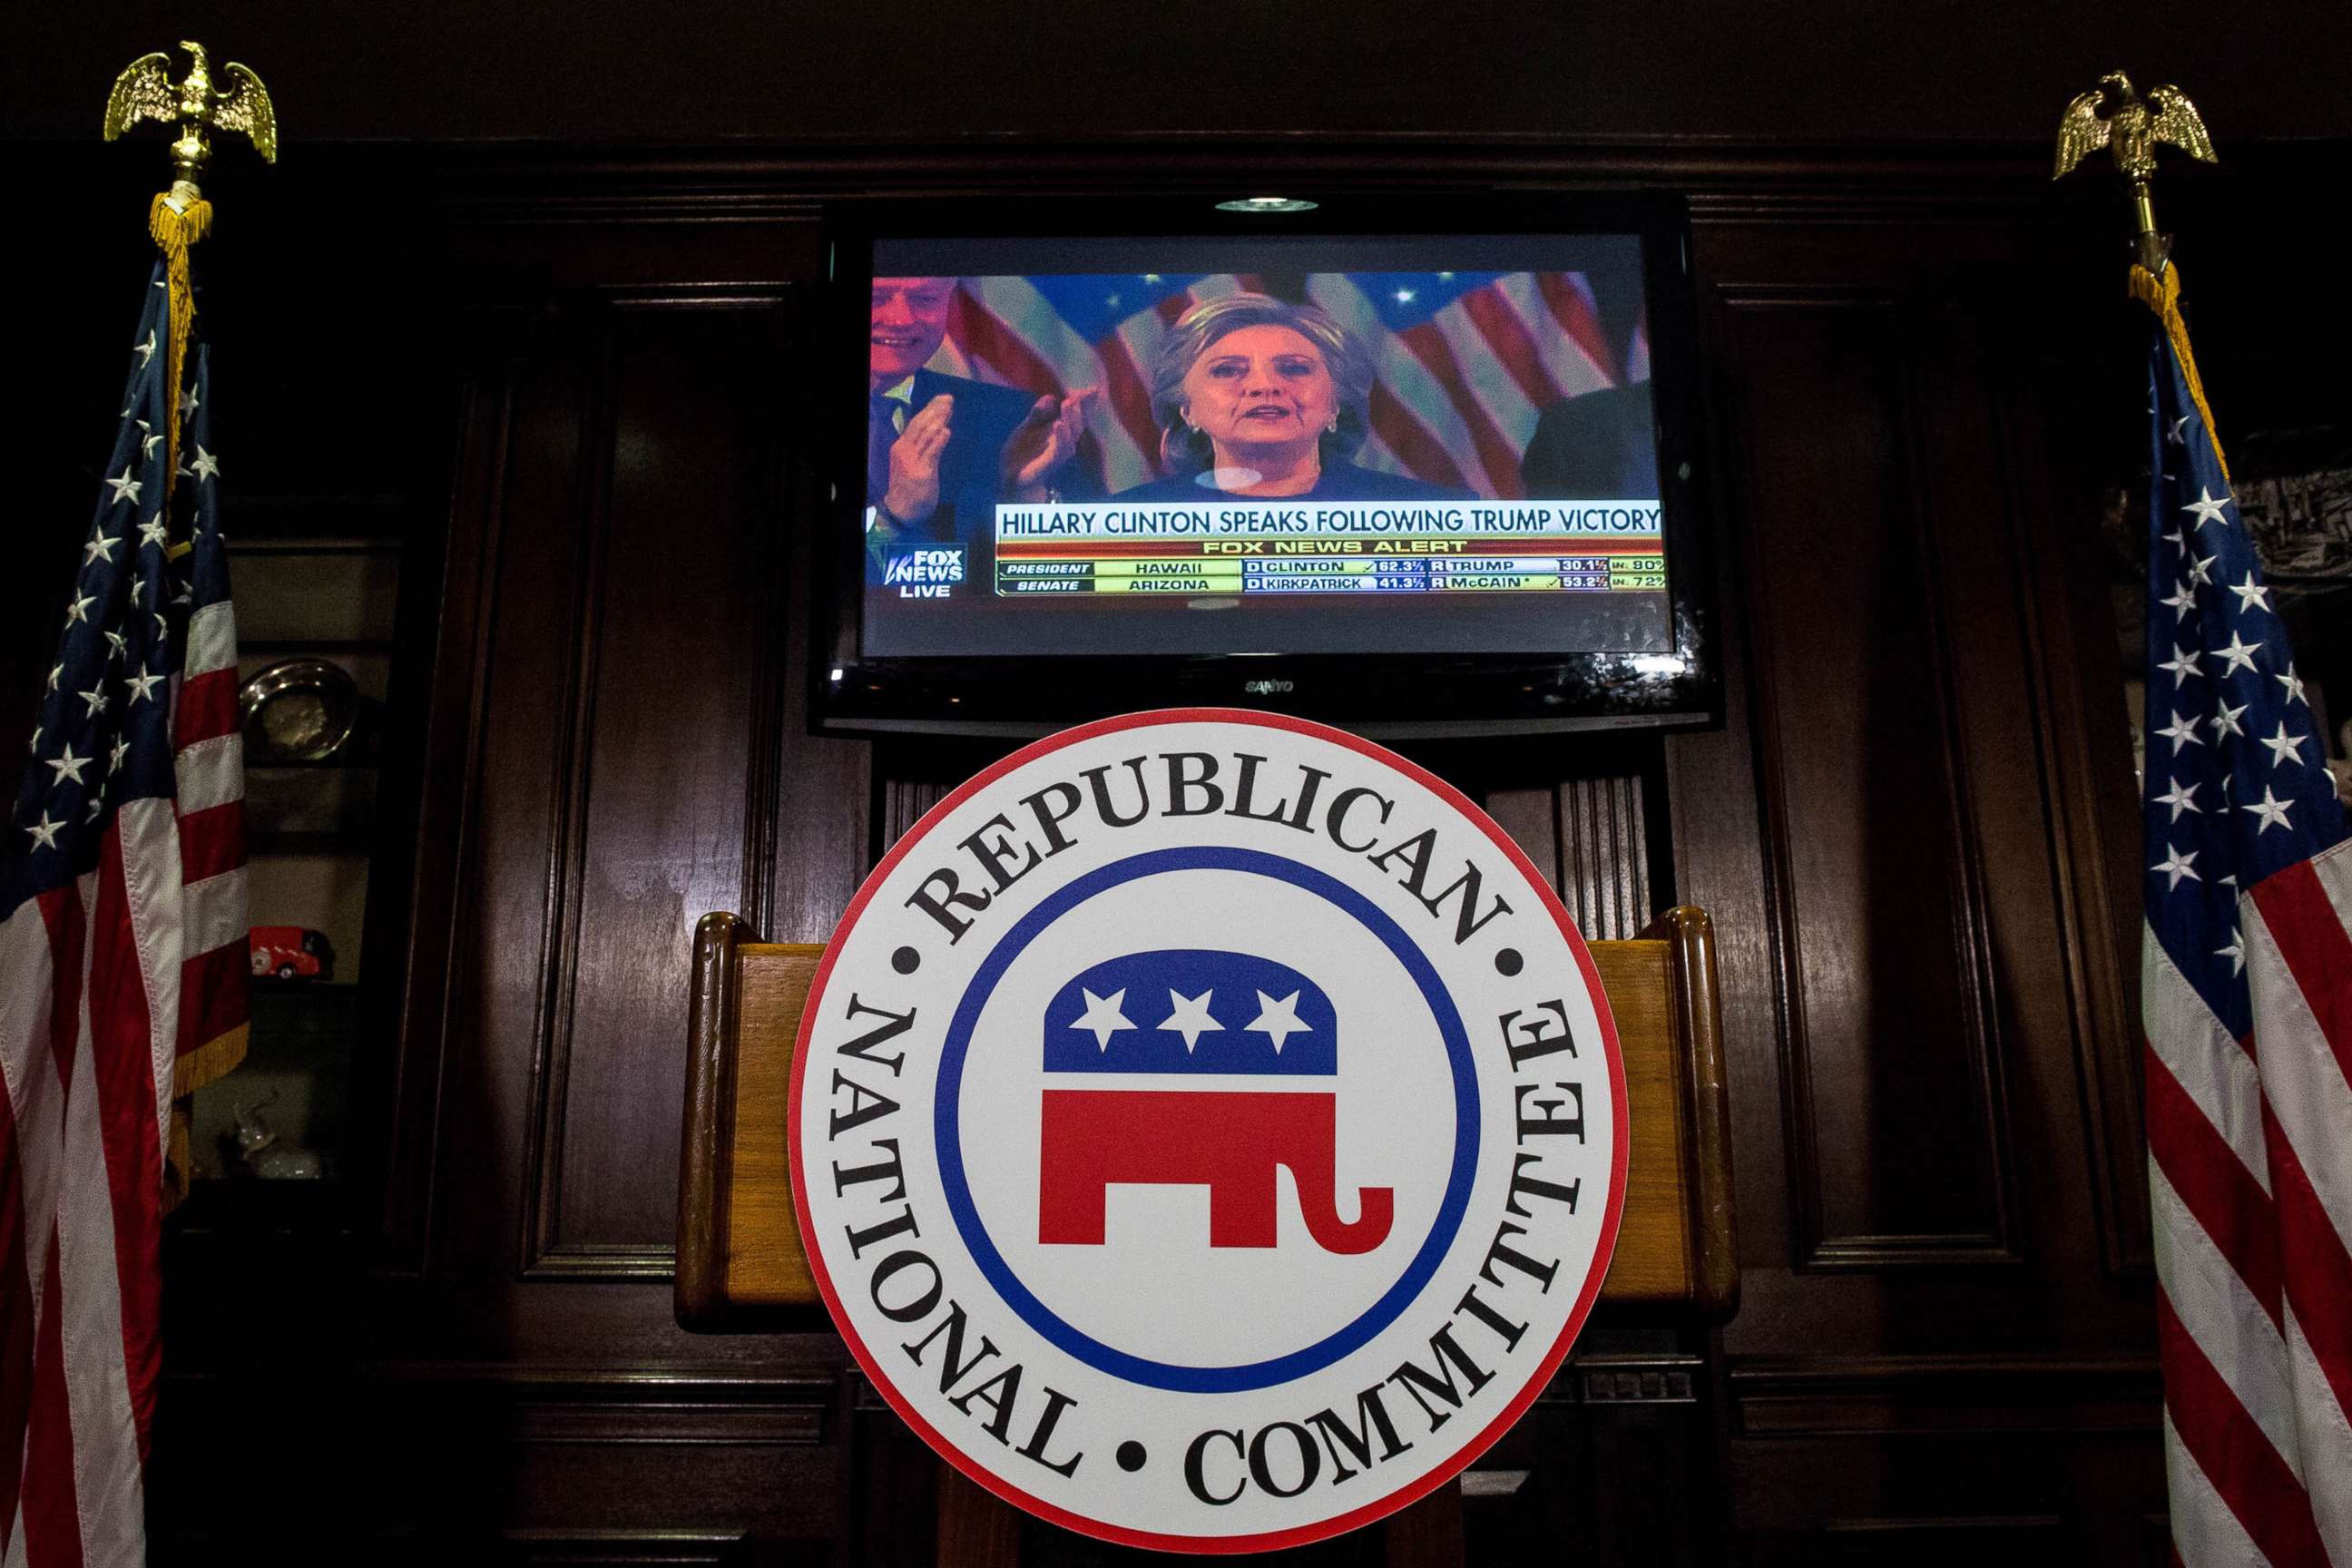 PHOTO: The GOP emblem adorns a podium before the start of a press conference at the Republican National Committee Headquarters in Washington, Nov. 9, 2016.